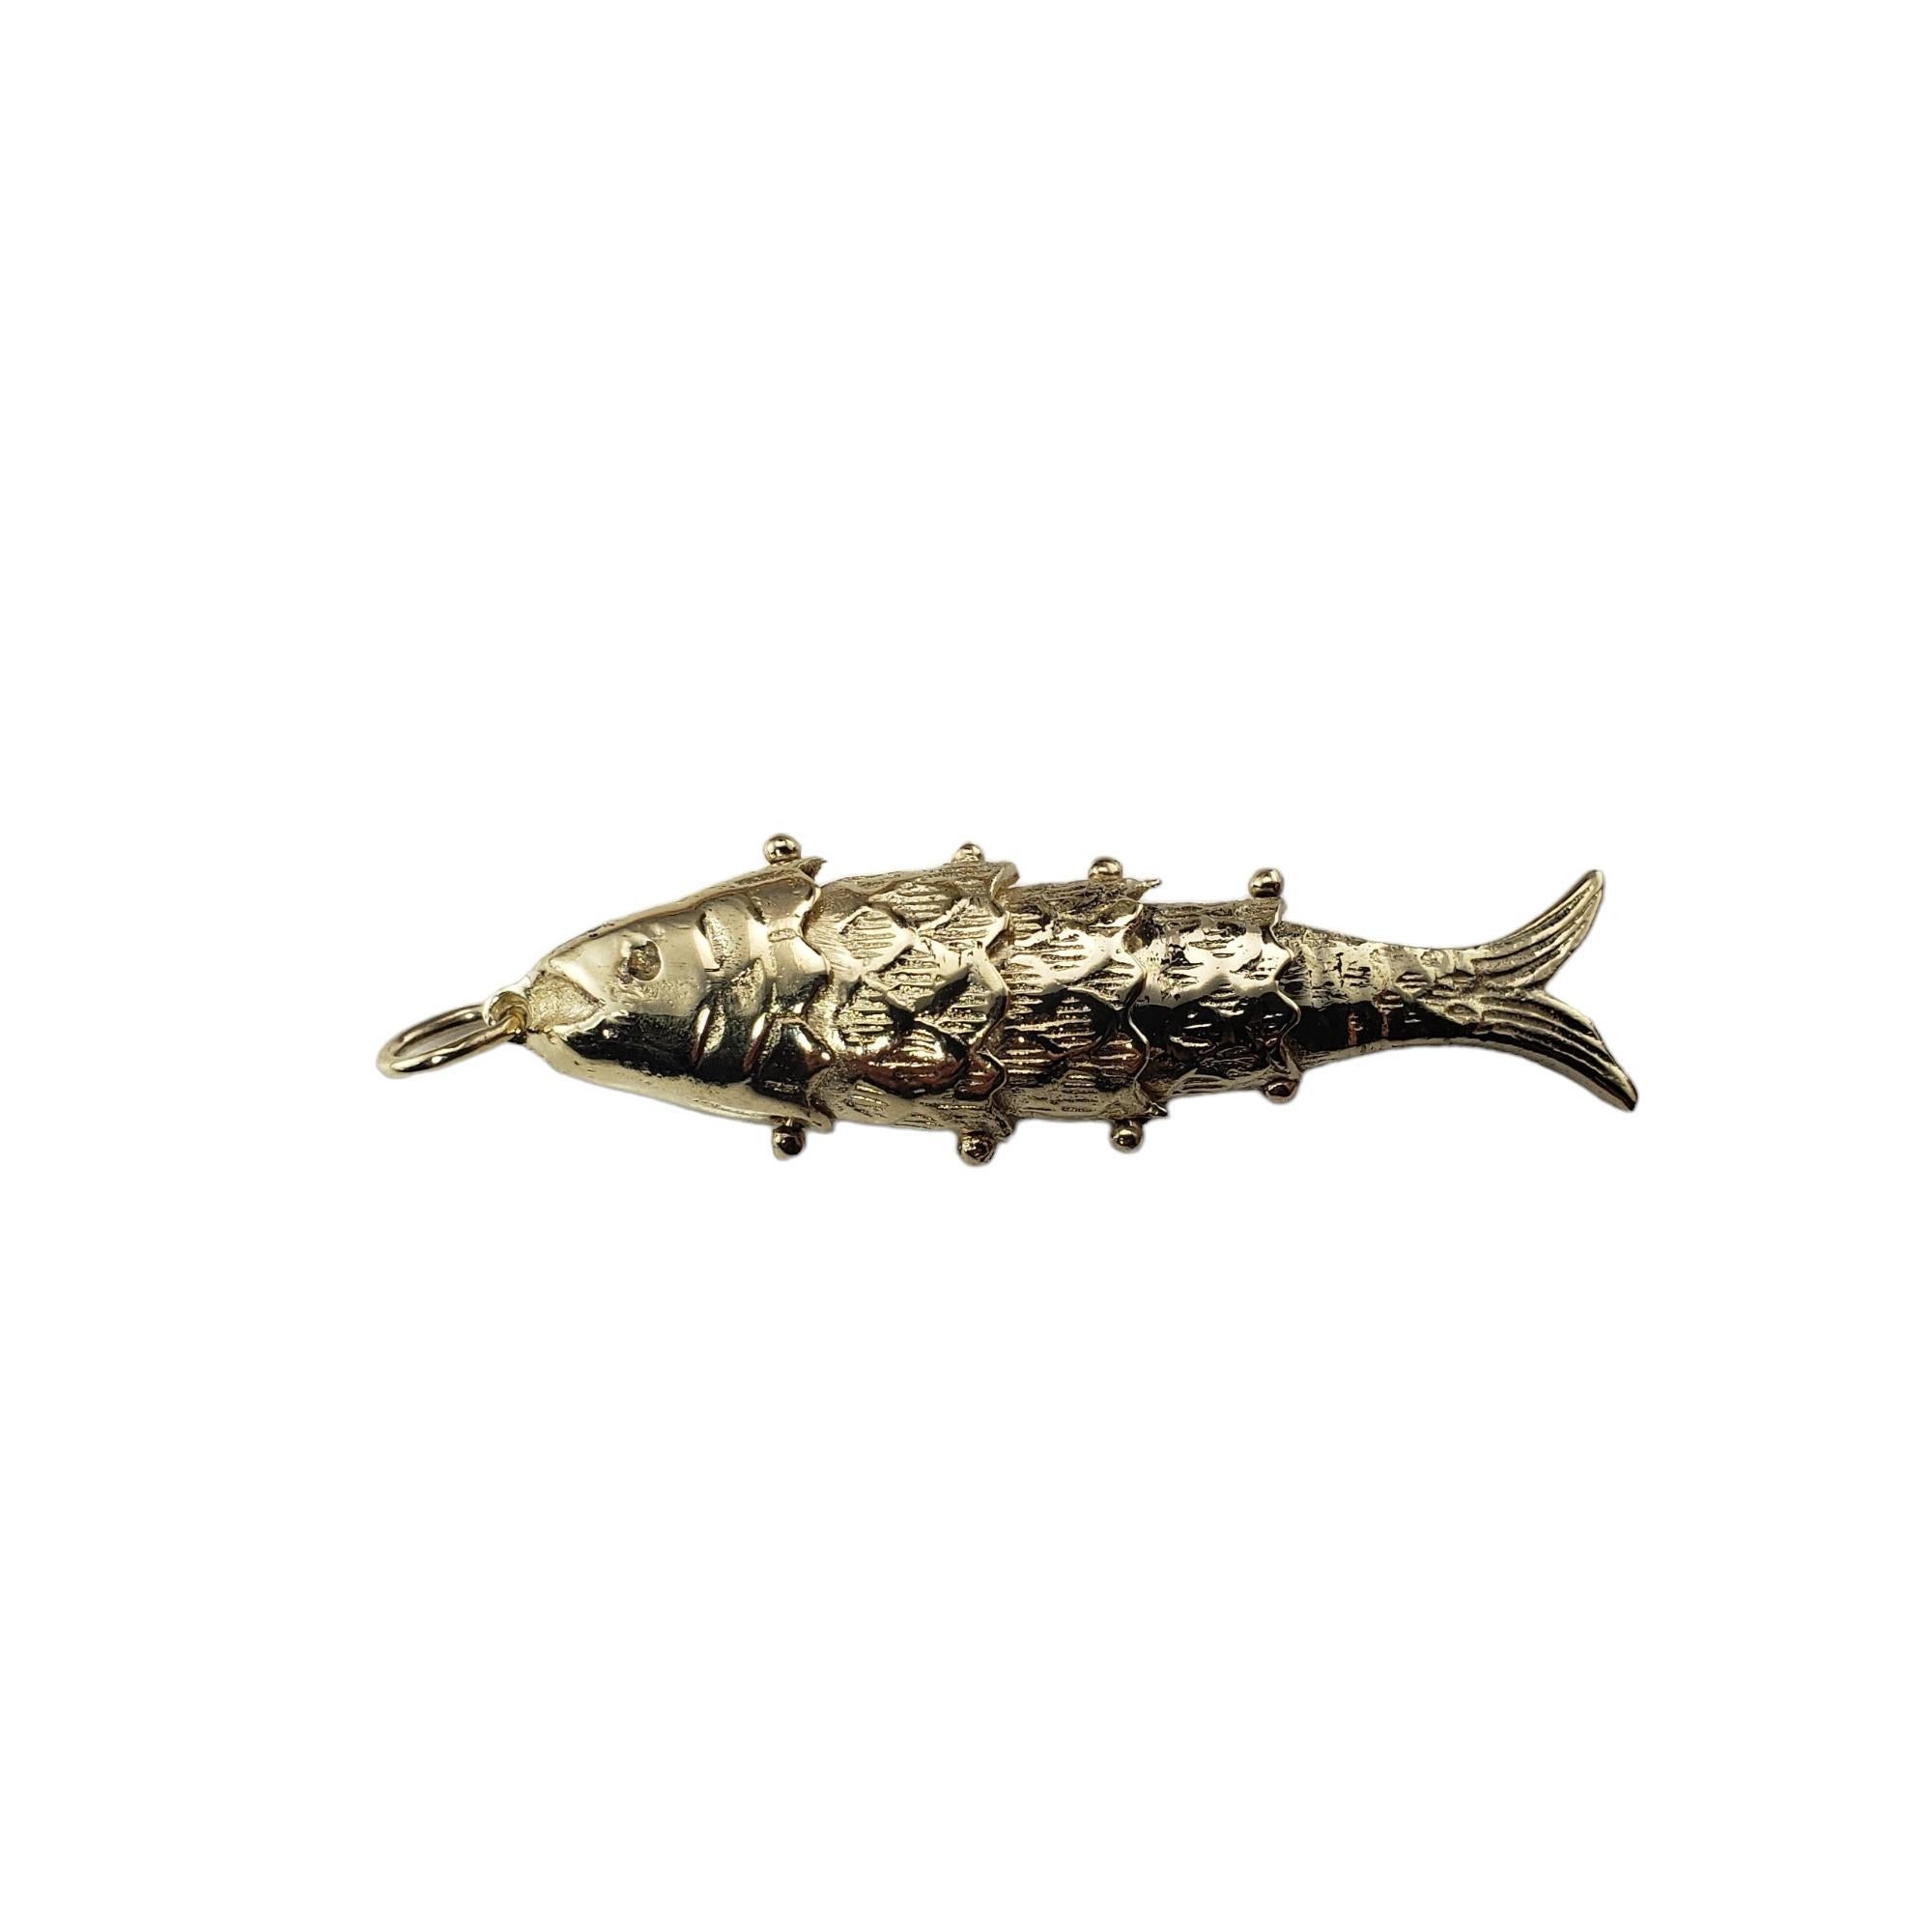  14 Karat Yellow Gold Flexible Fish Pendant #15572 In Good Condition For Sale In Washington Depot, CT